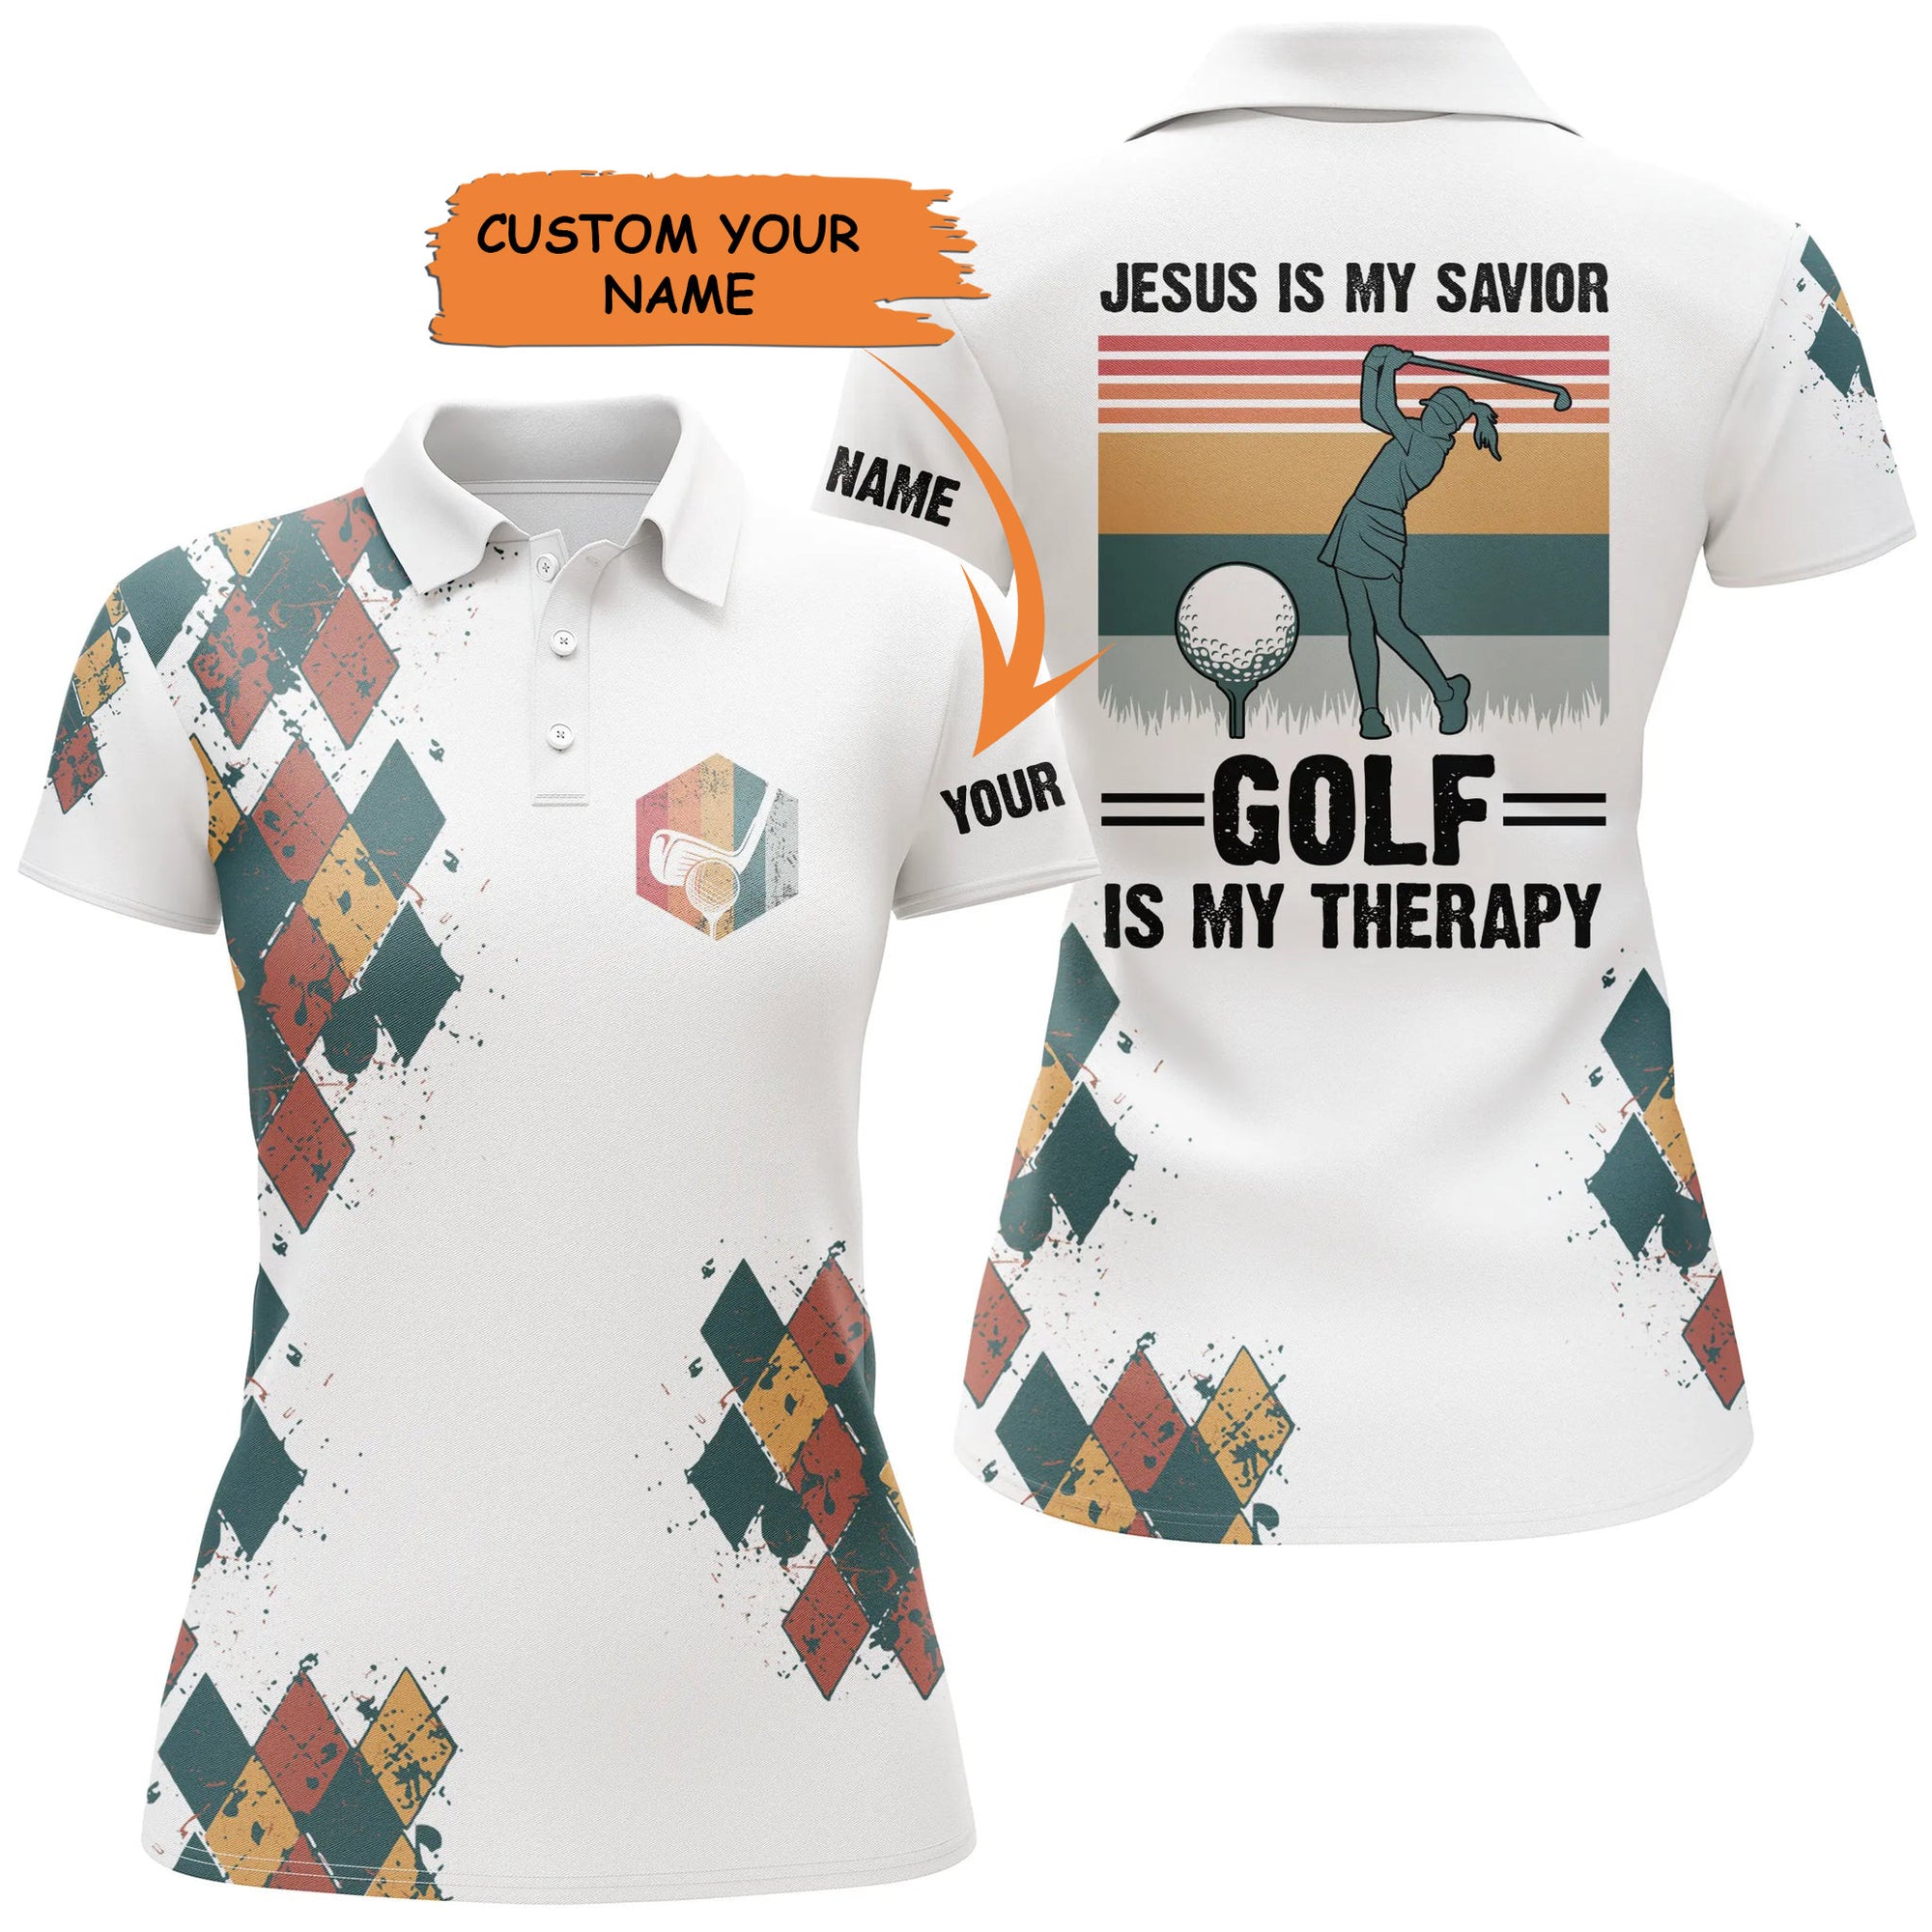 Womens Golf Polo Shirt Jesus Is My Savior Golf Is My Therapy Custom Name Vintage Ladies Golf Tops, Best Gift For Women